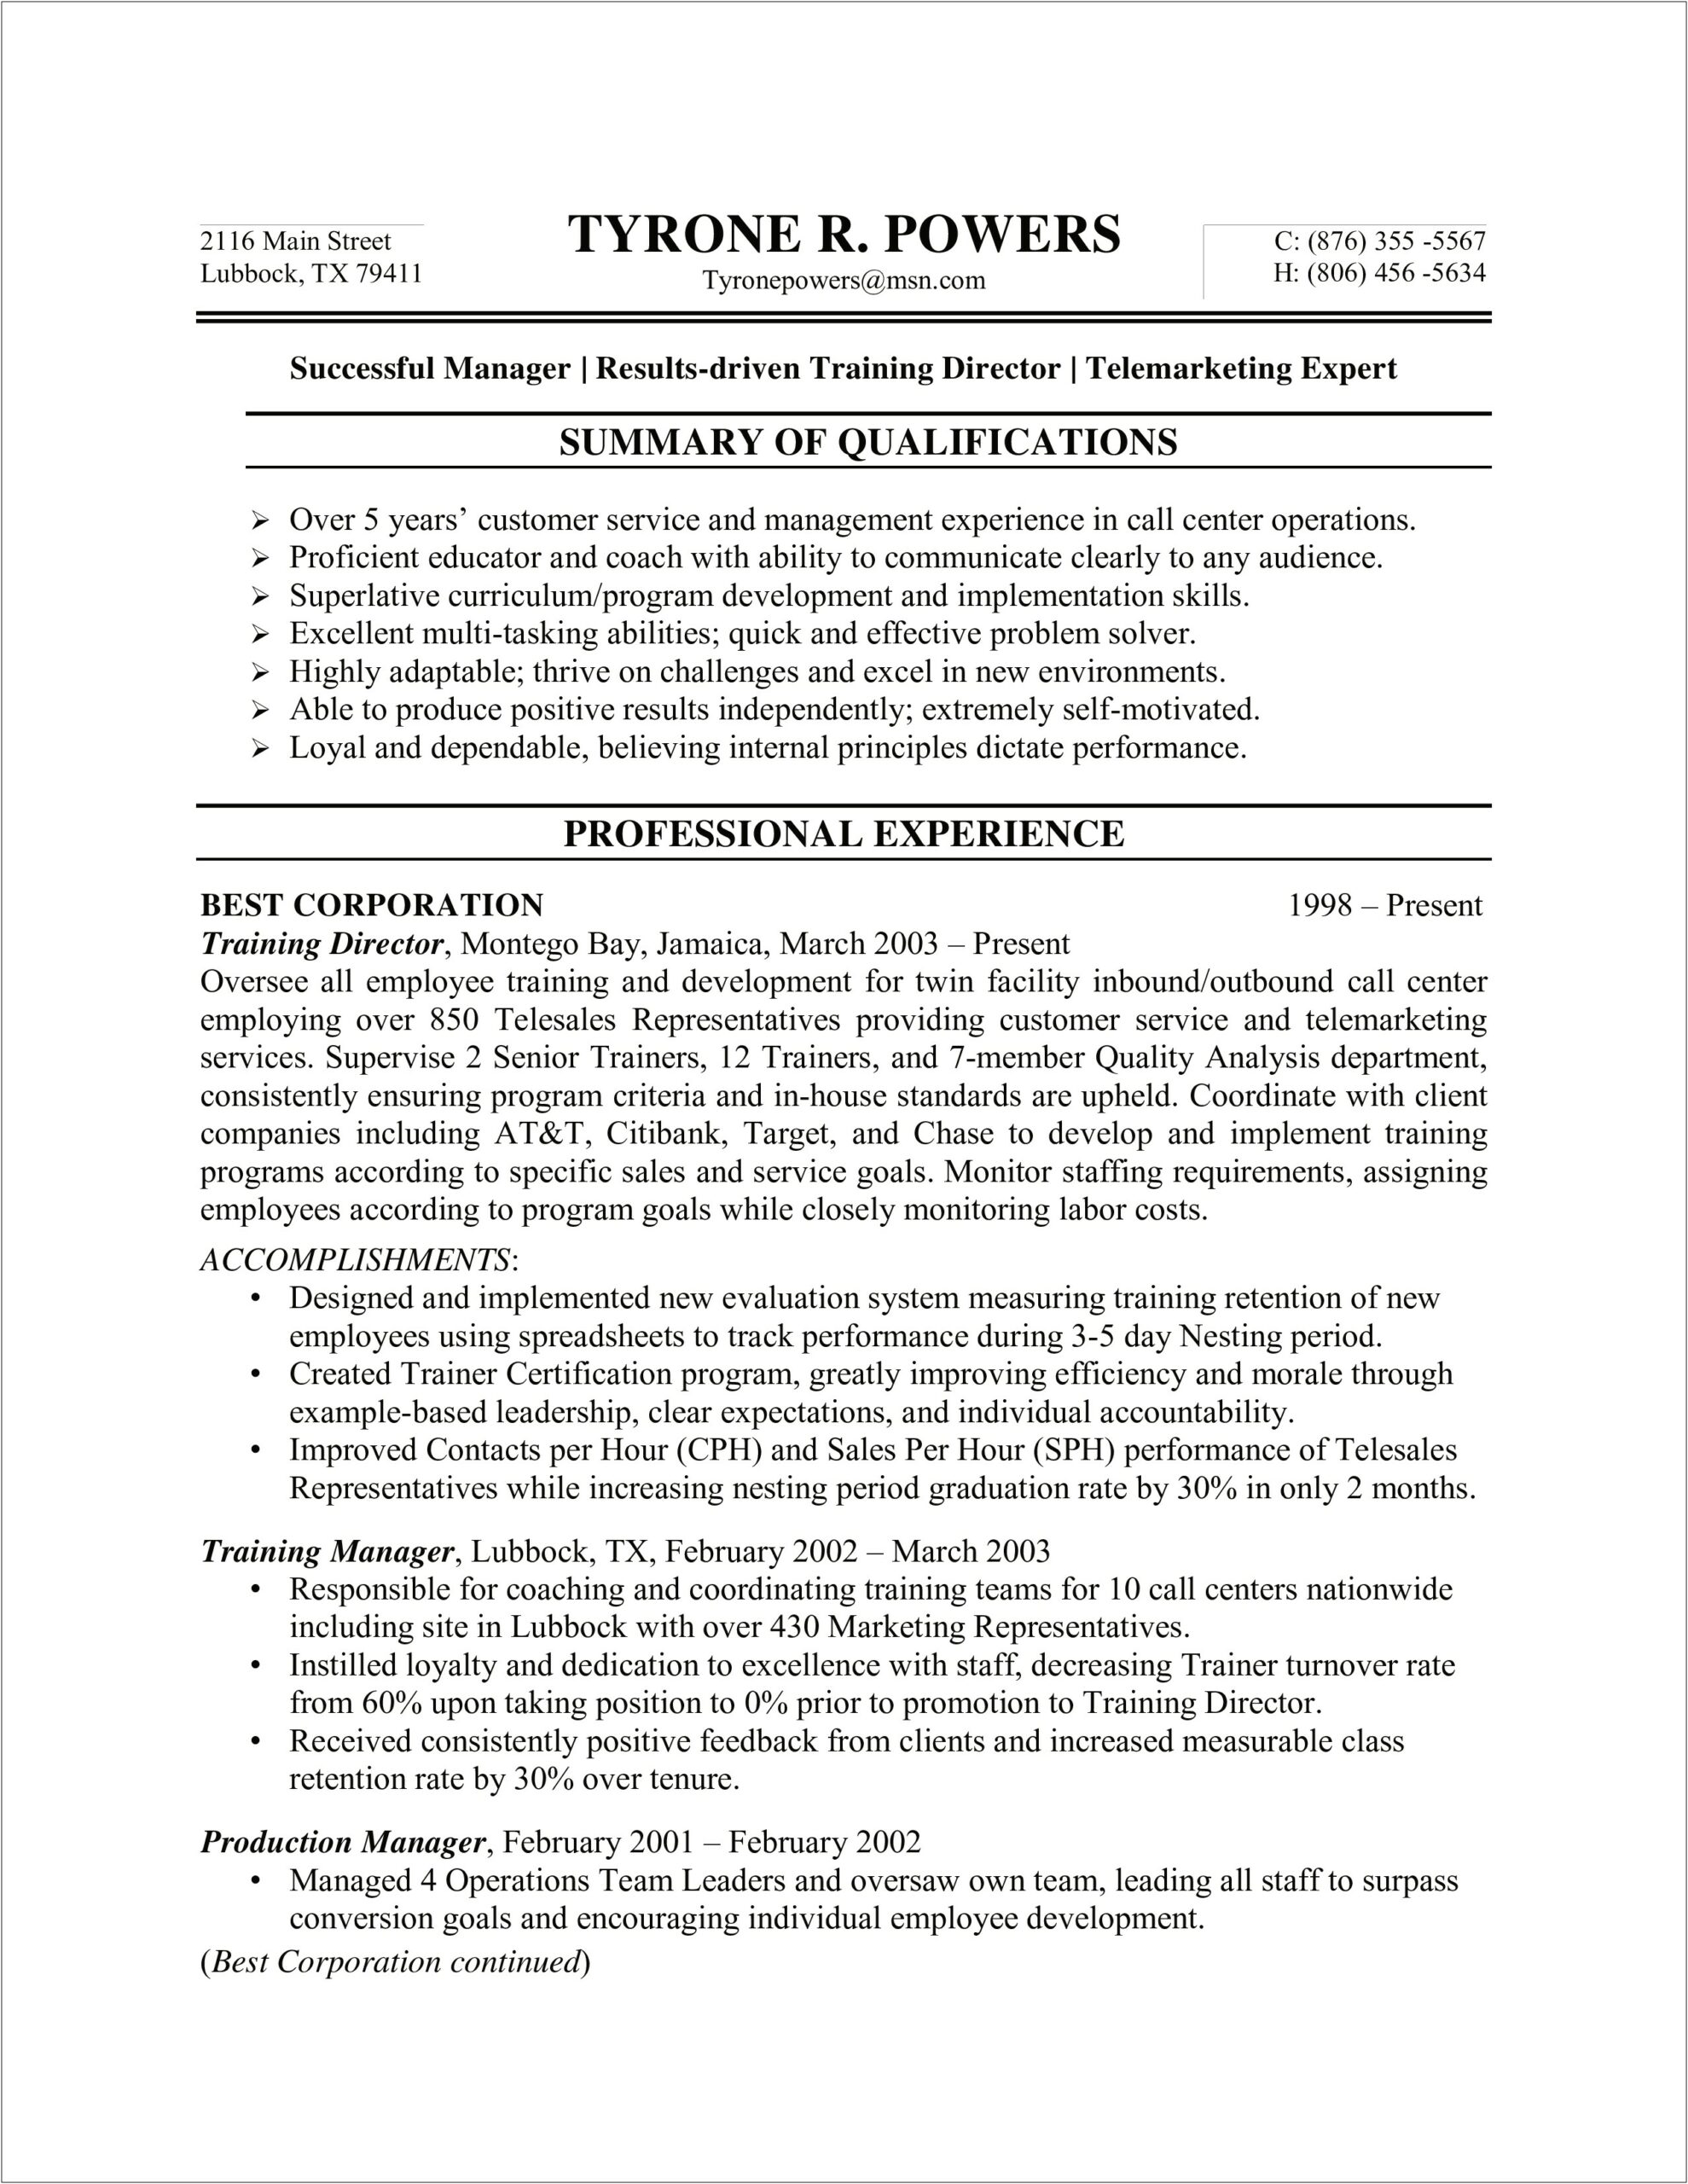 Call Center Resume Sample With Experience